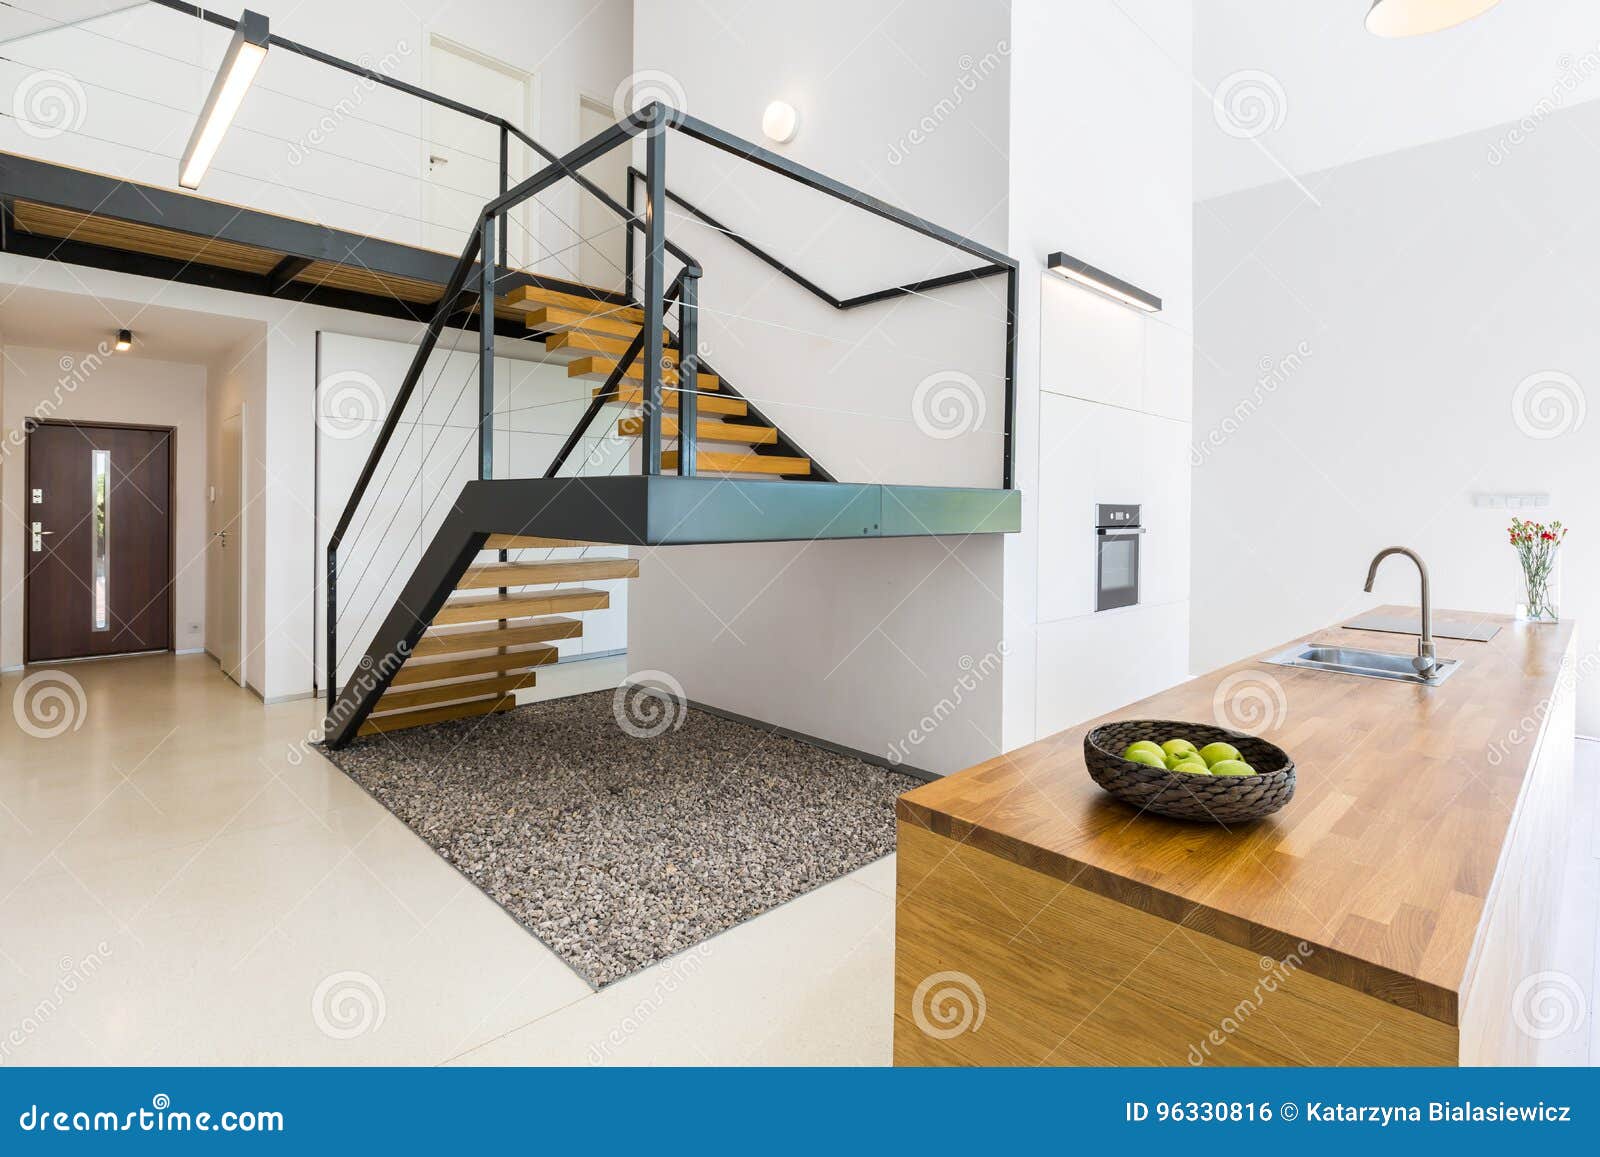 modernistic interior with massive staircase